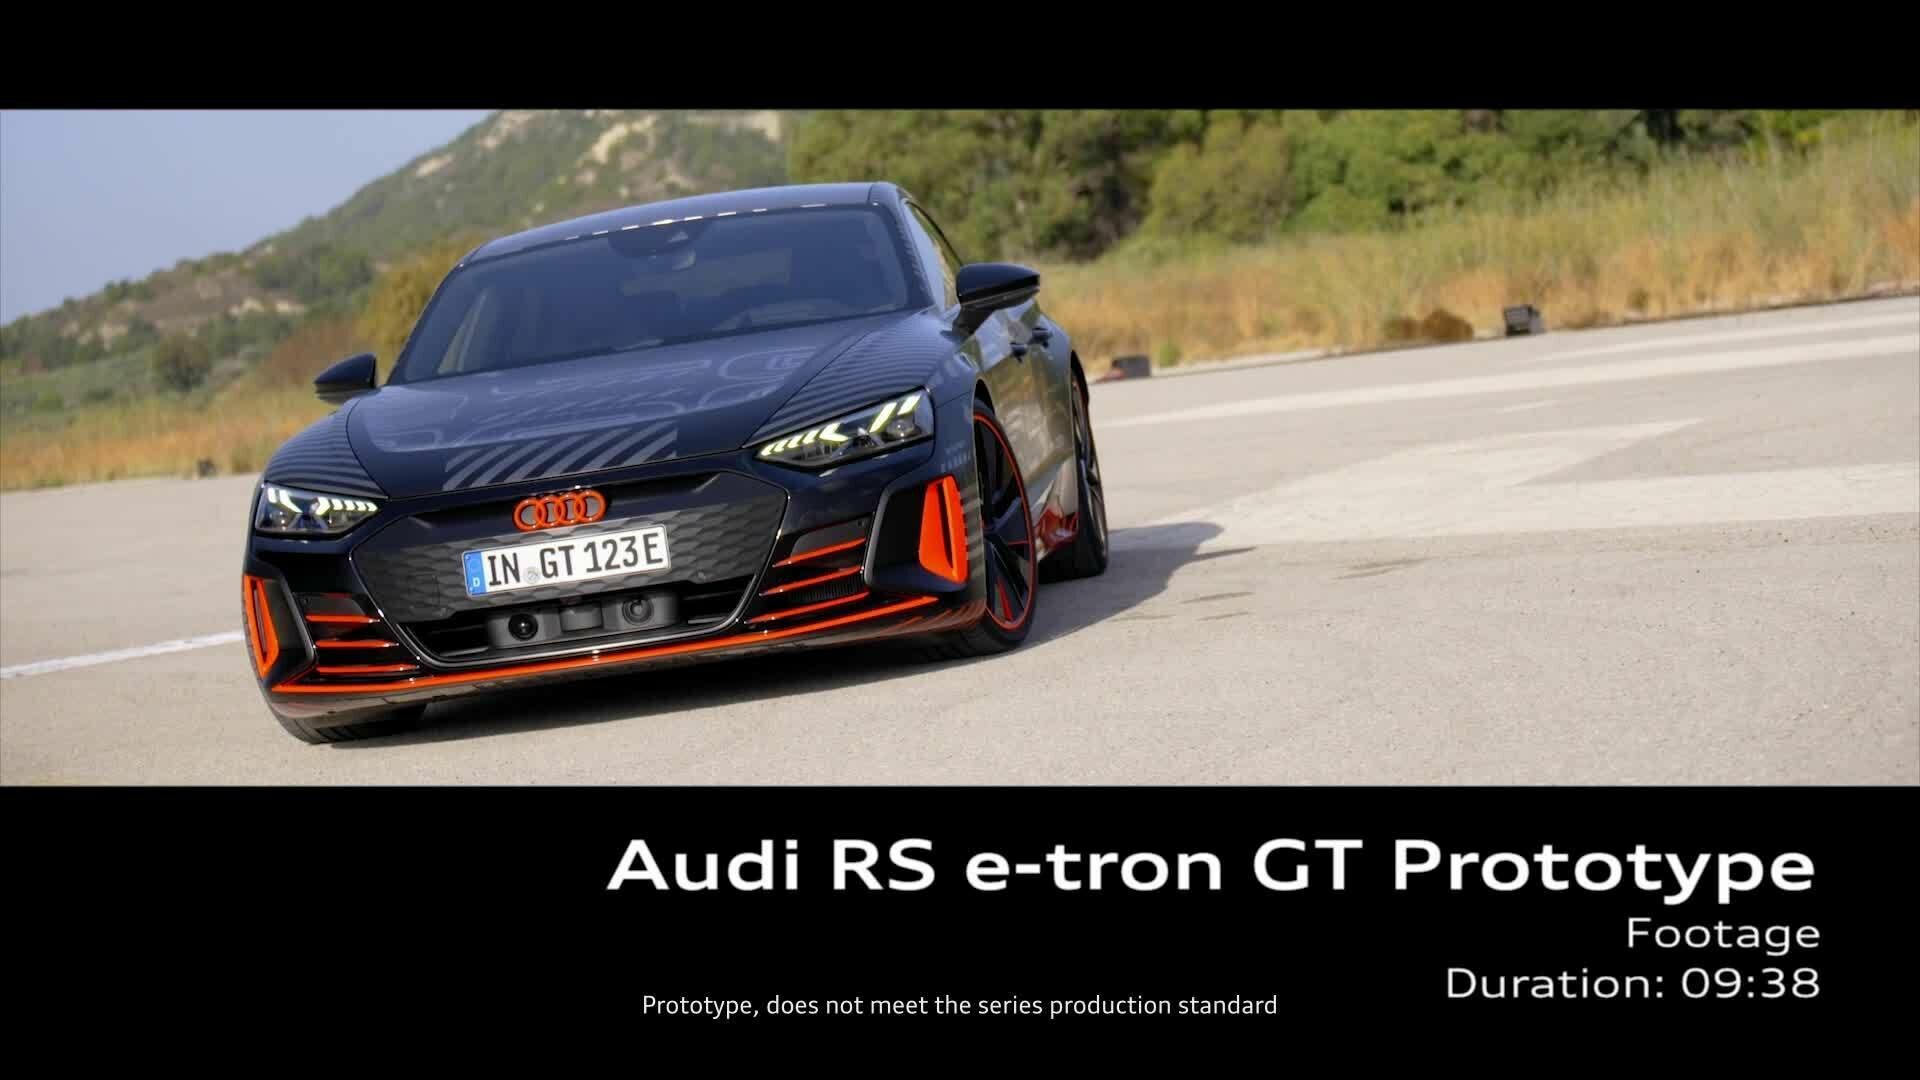 Footage: Audi RS e-tron GT Prototyp on Location